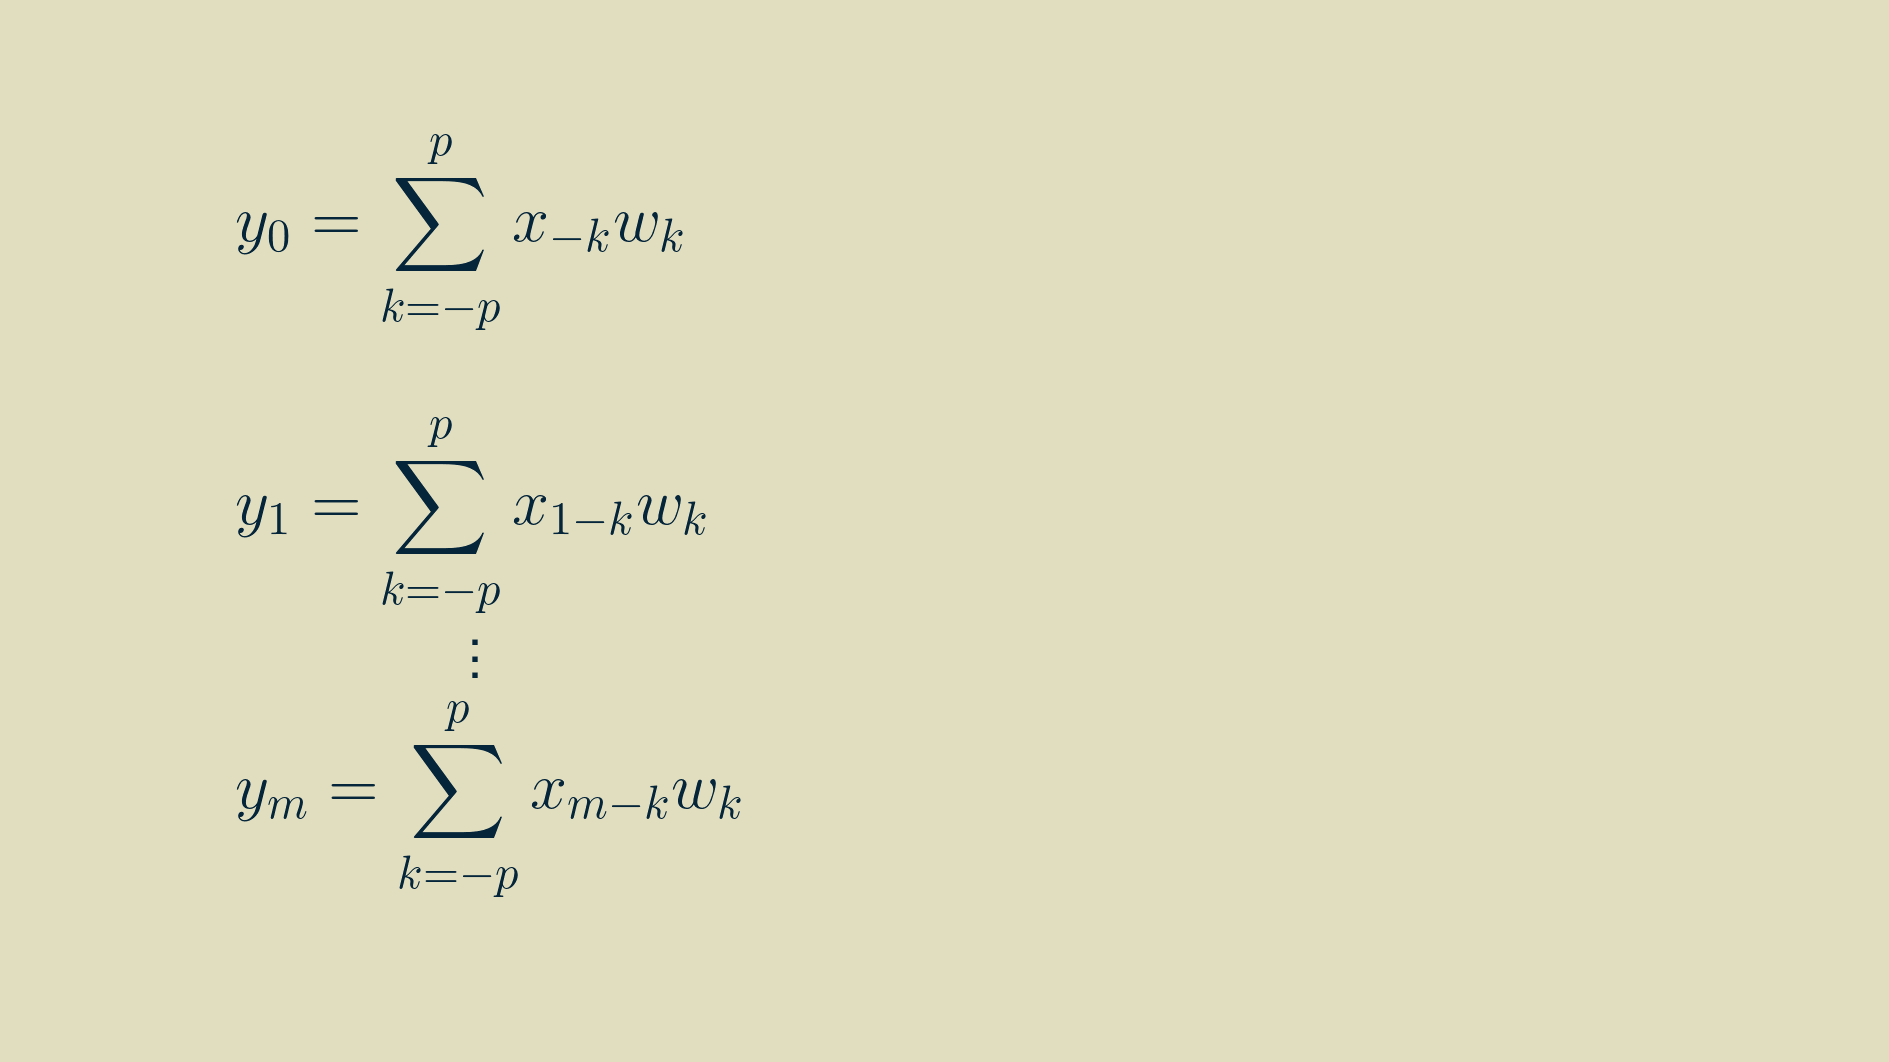 Convolution calculations, with summations